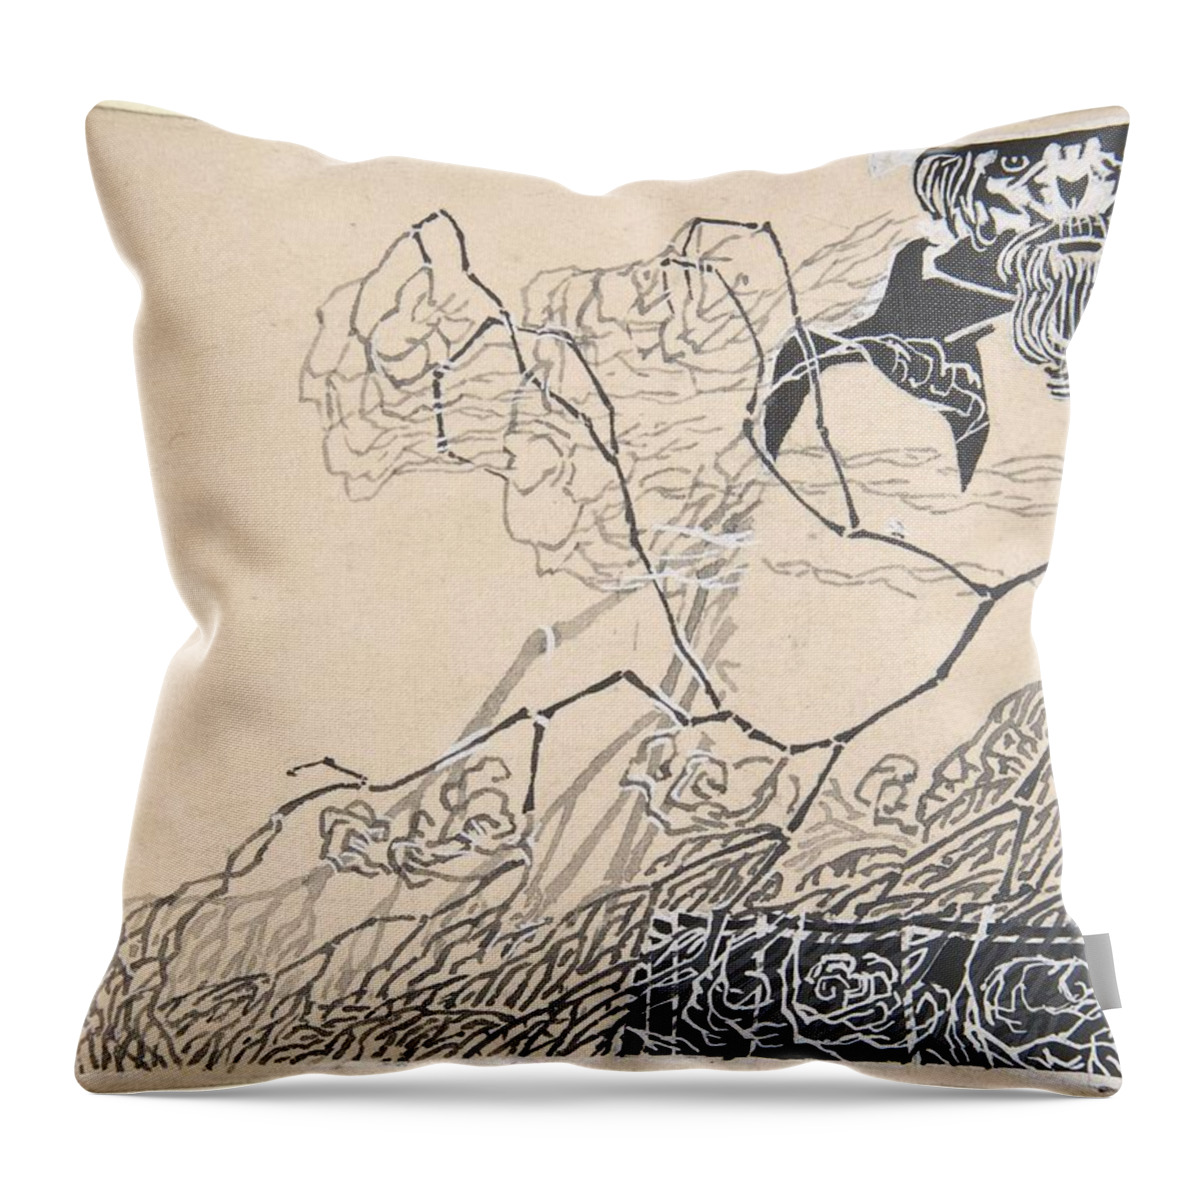 Design Throw Pillow featuring the painting Design for a Book Illustration with a Man and Tree Branches Hugo Steiner-Prag Czech, 1880-1945 by Hugo Steiner-Prag